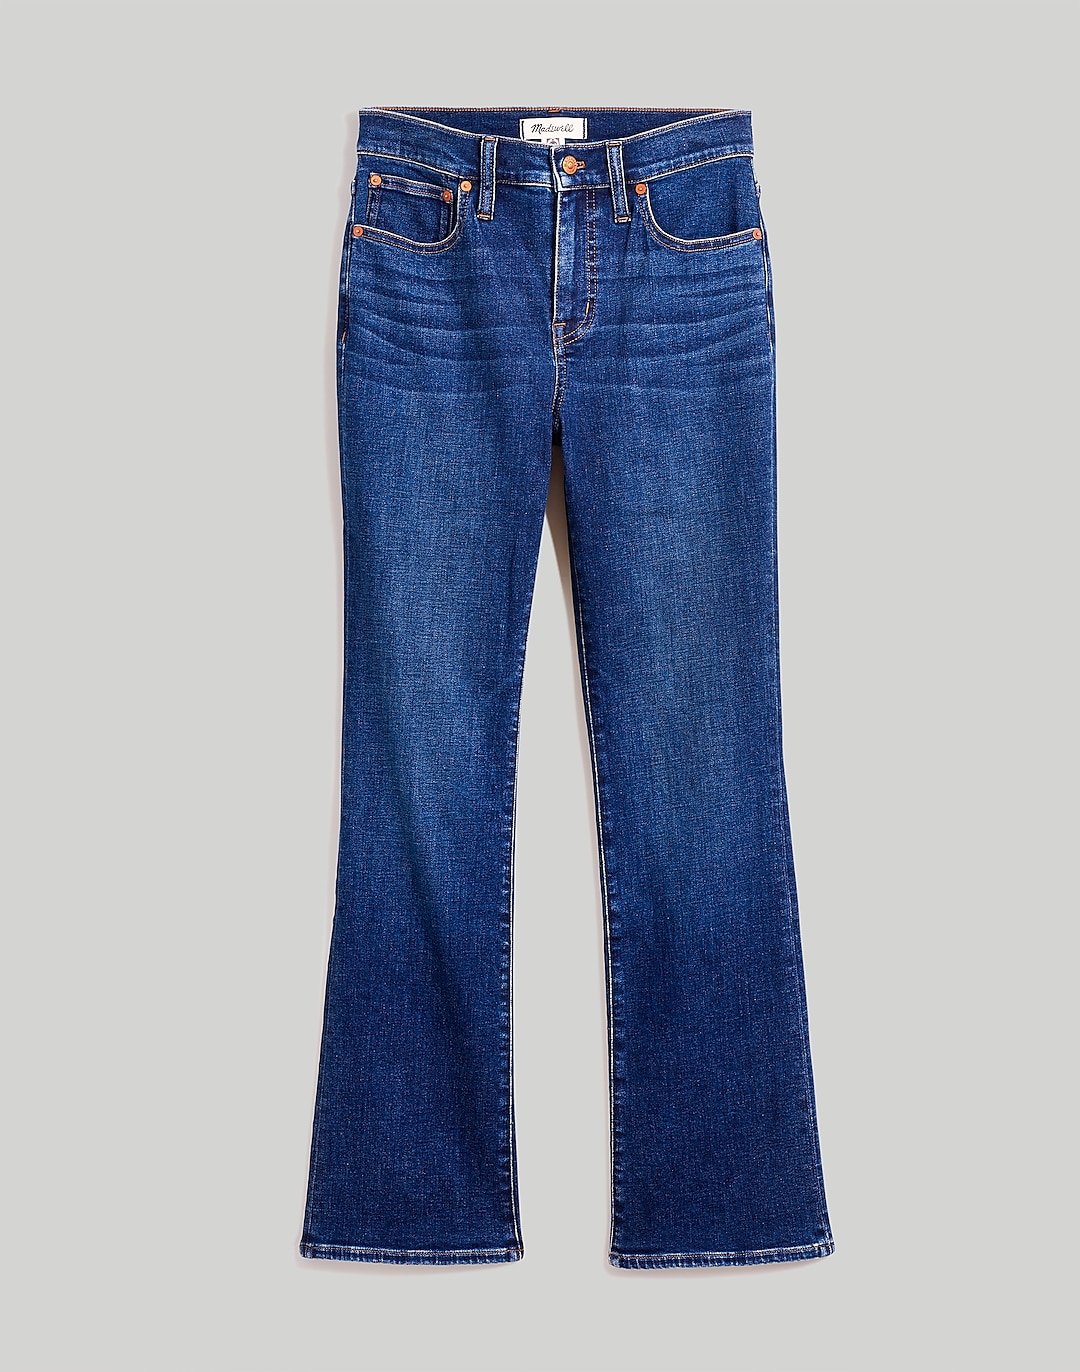 Kick Out Crop Jeans | Madewell